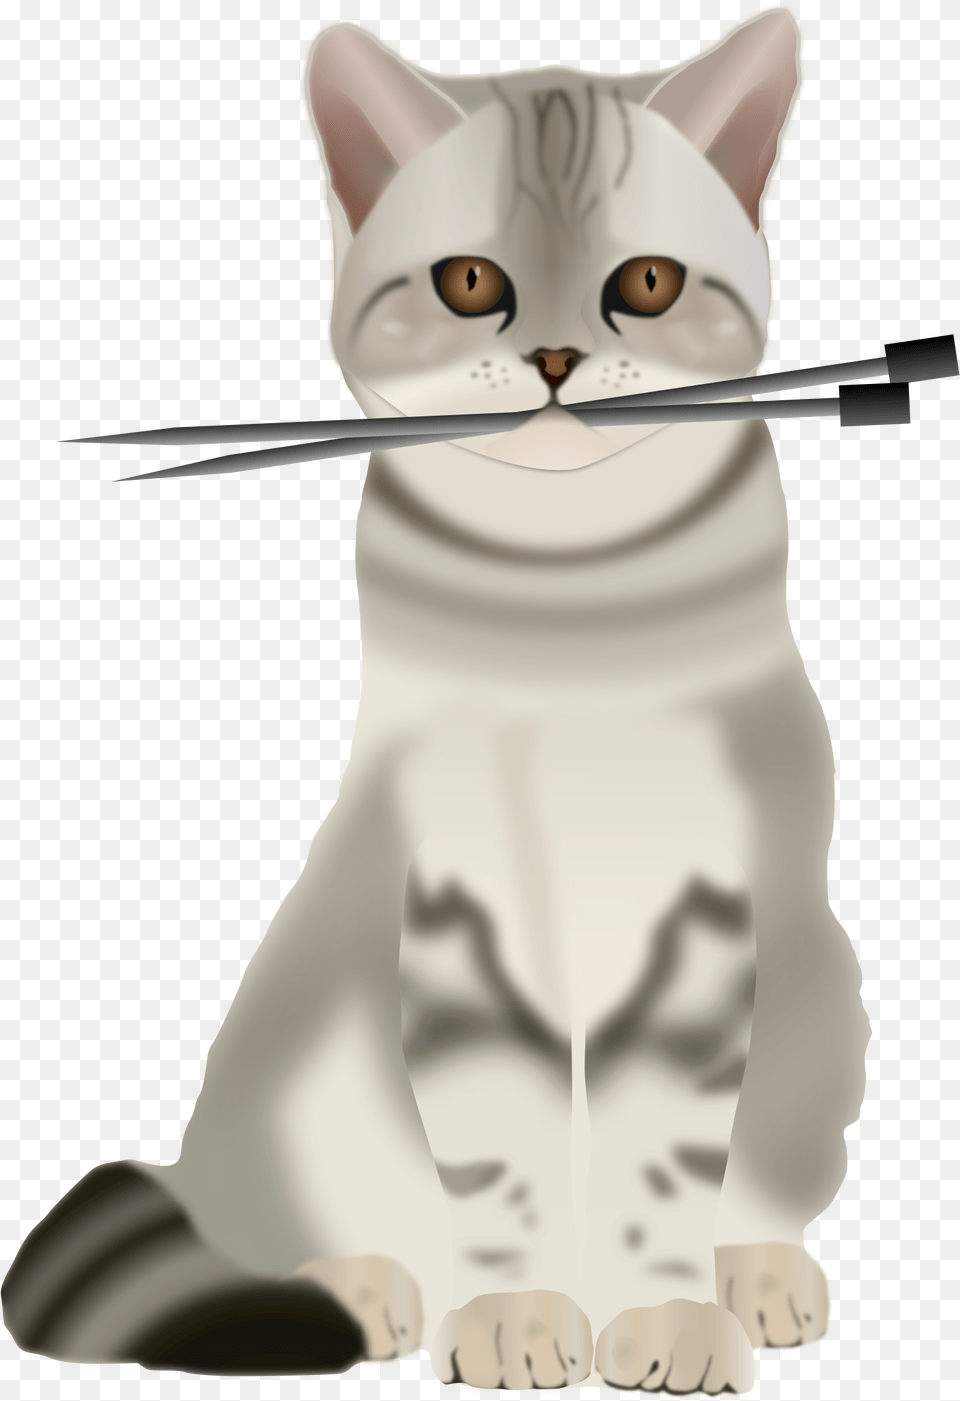 This Icons Design Of Cat With Knitting Needles, Animal, Pet, Mammal, Baby Free Png Download